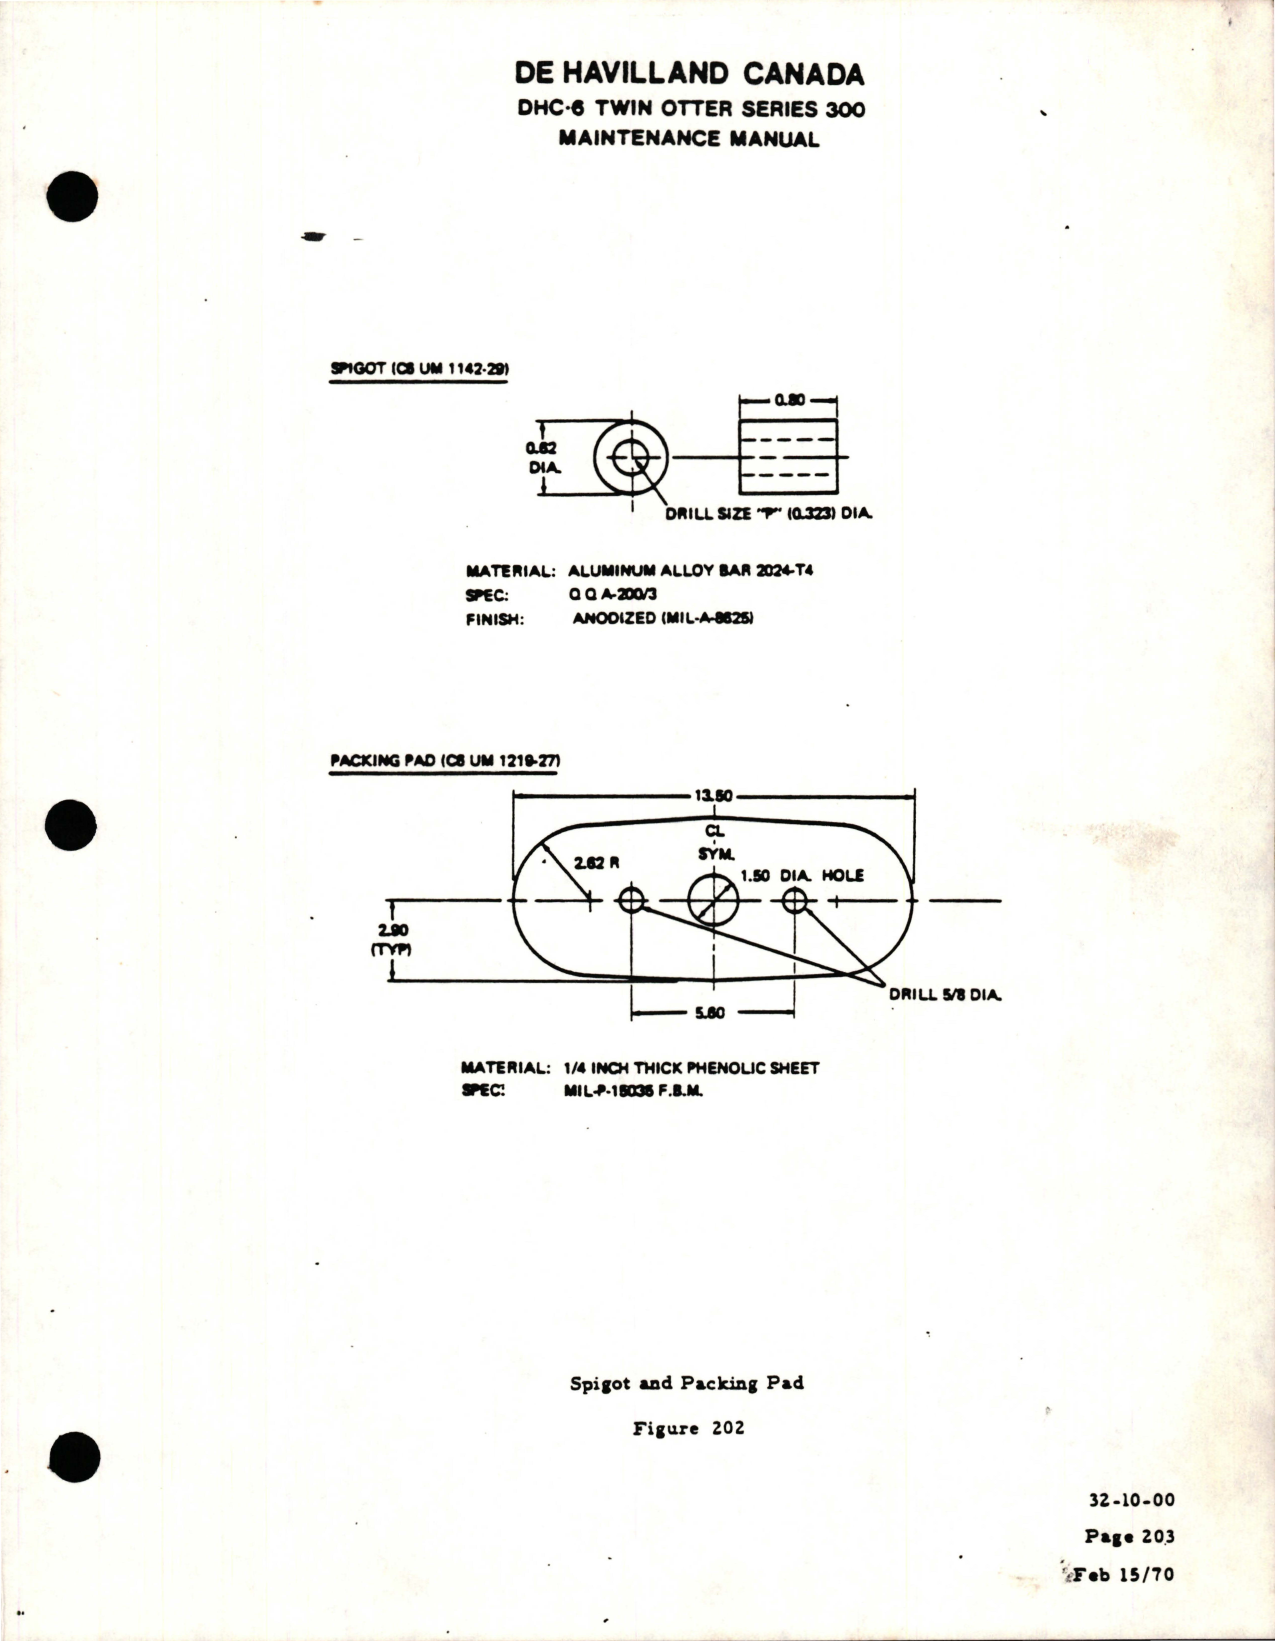 Sample page 5 from AirCorps Library document: Overhaul Manual for Main Landing Gear Leg Assembly for DHC-6 Twin Otter - Part C6U1103